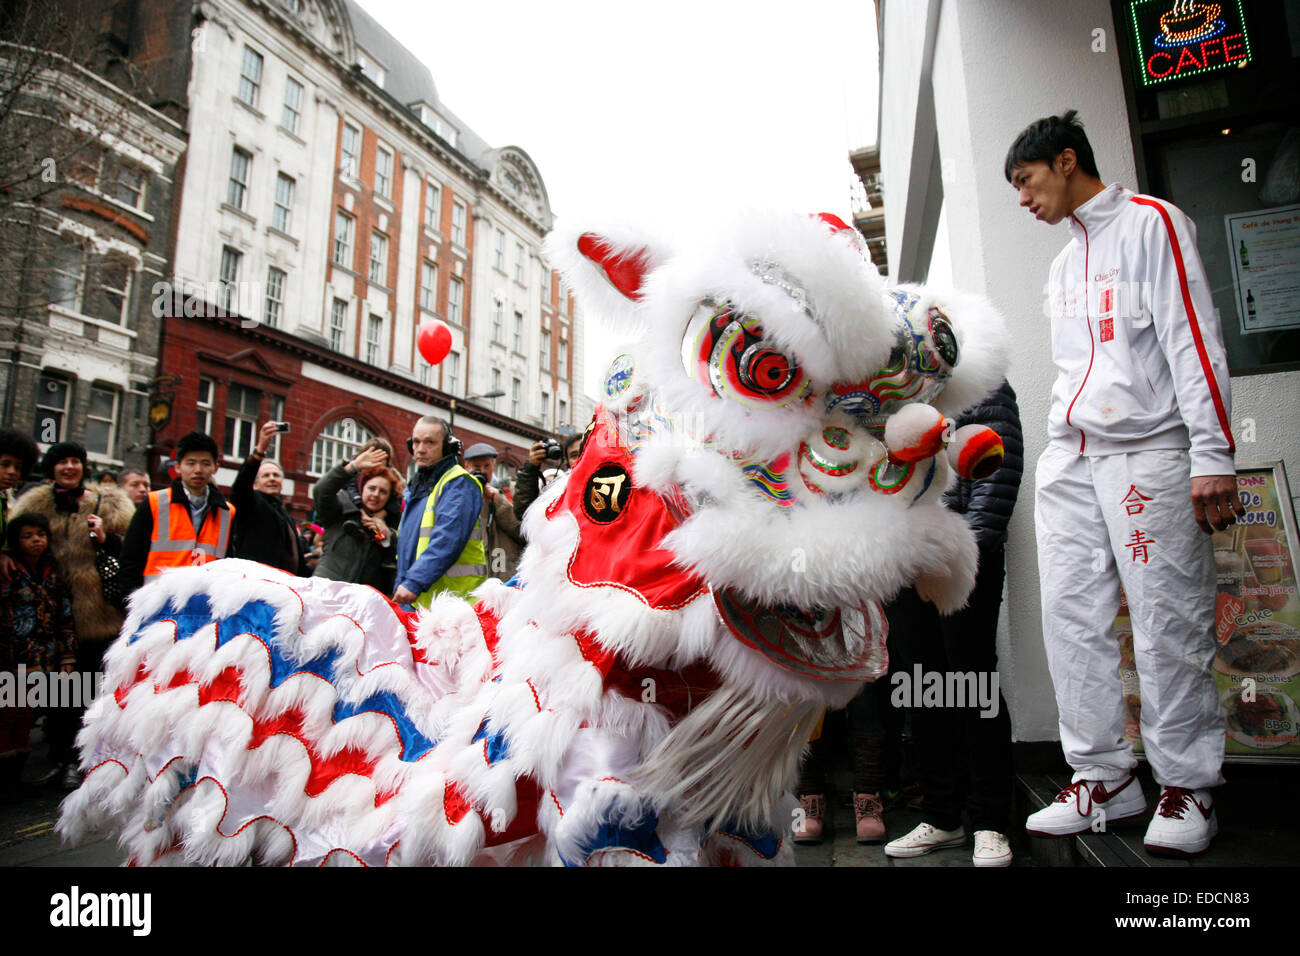 LONDON - January 29, 2012: Performers, lion dance, take part in the celebration of Chinese New Year. Various traditional perform Stock Photo